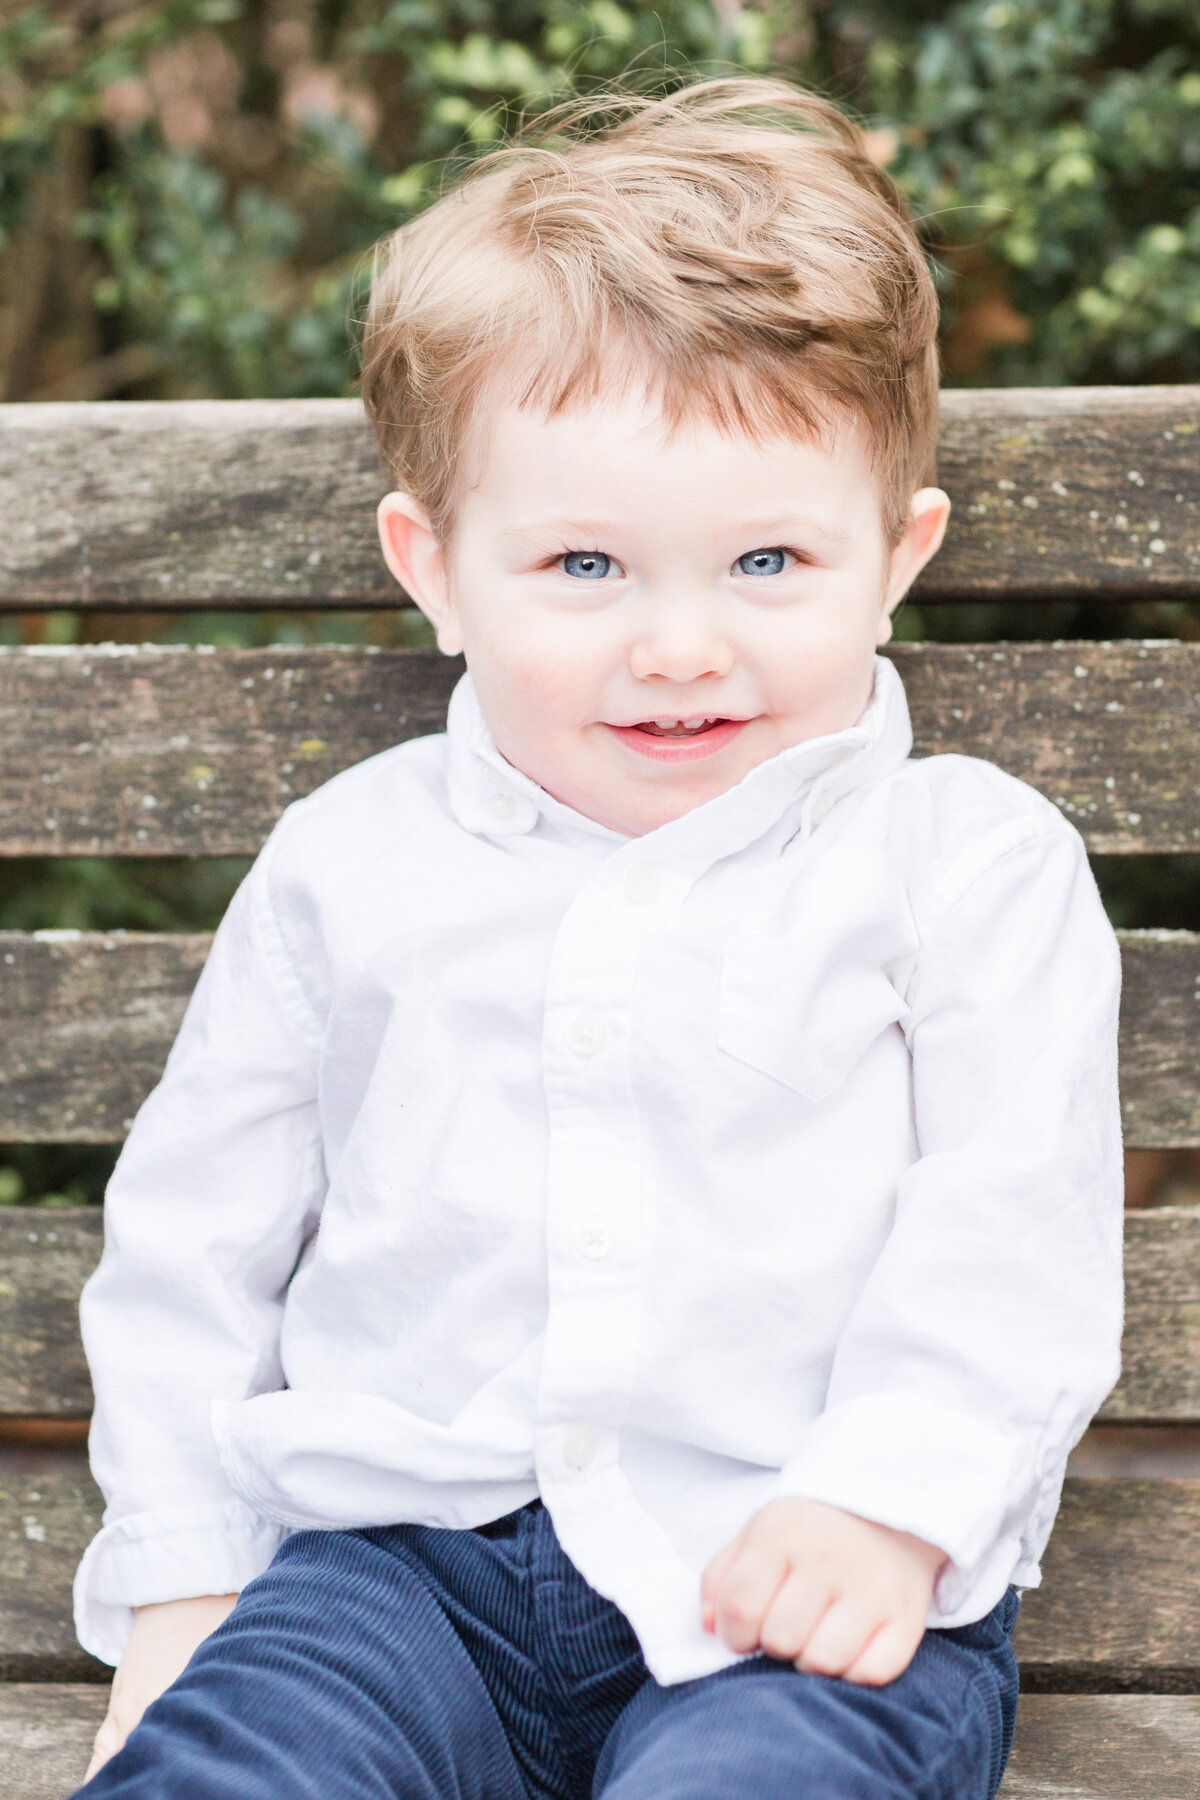 Boy with blue eyes smiling at camera